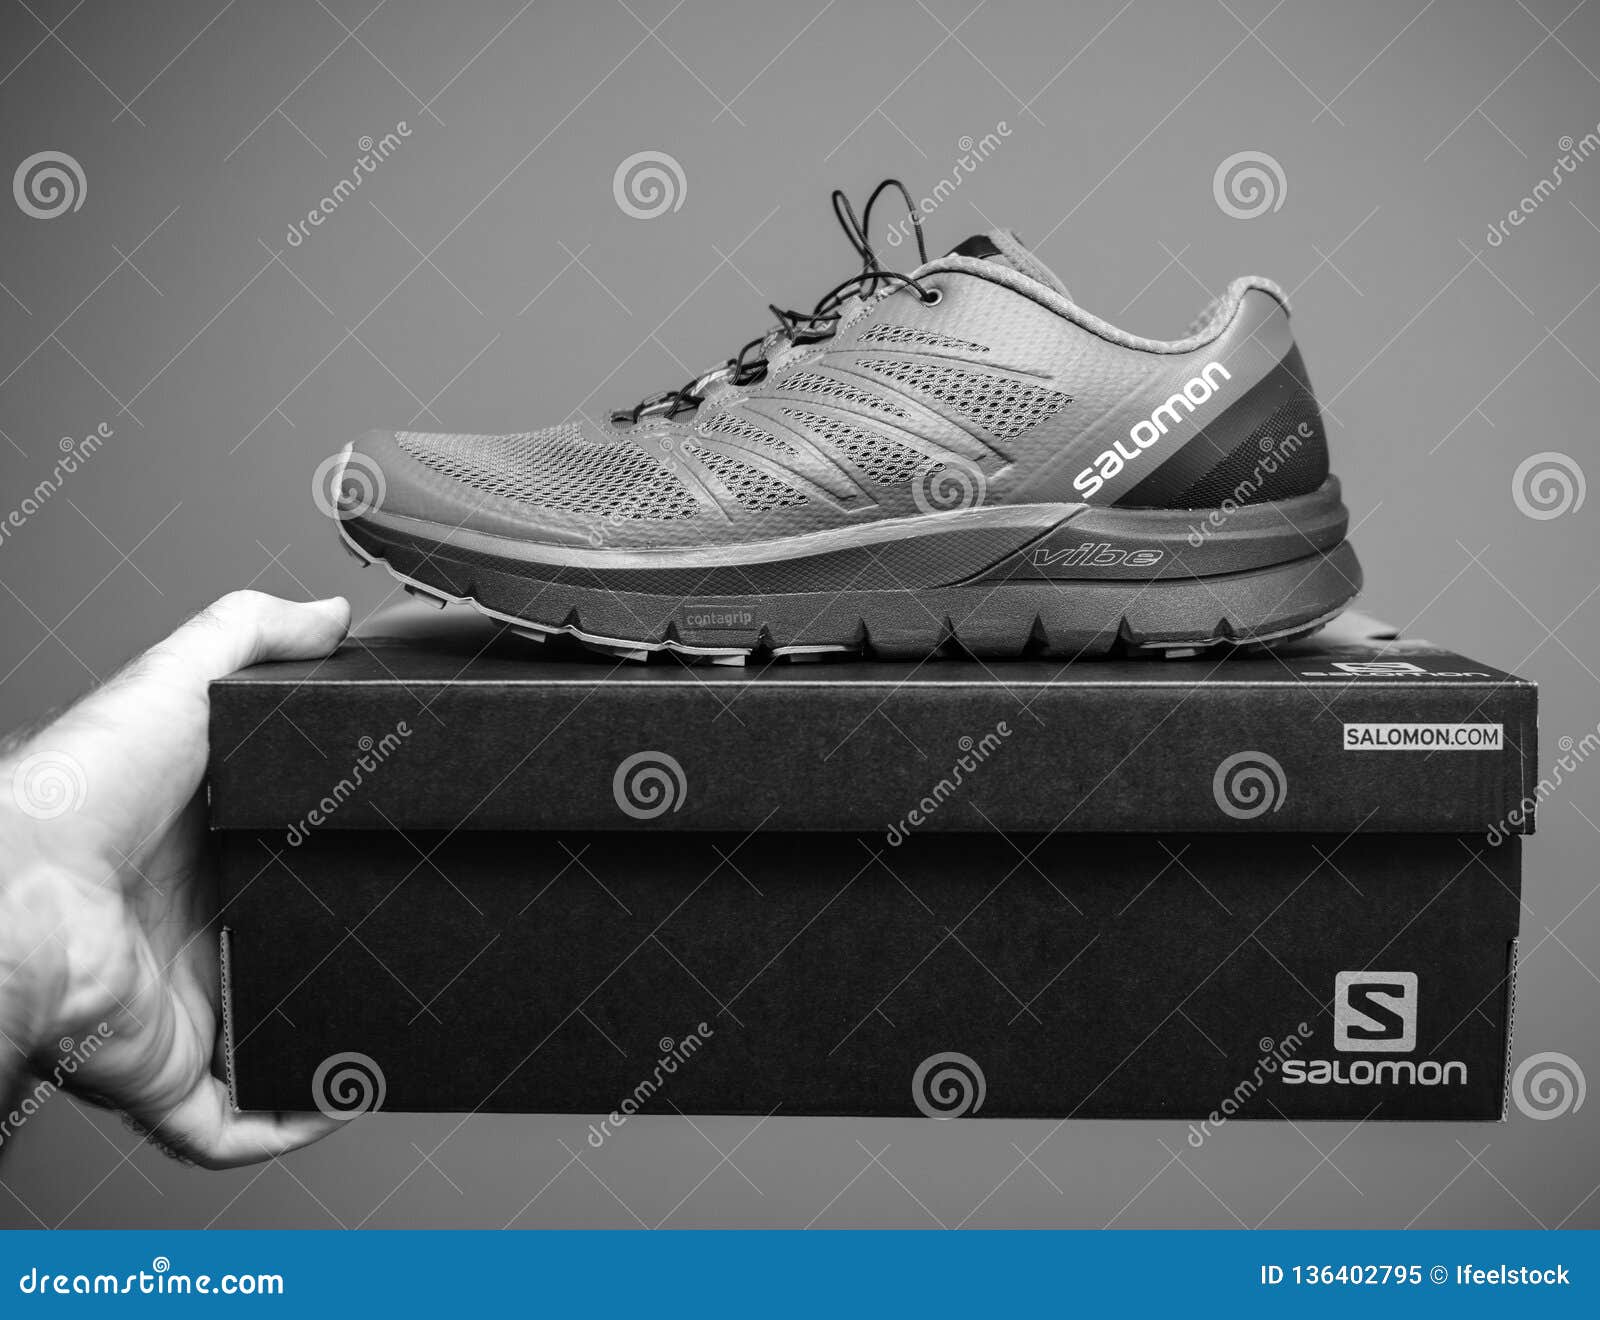 Salomon Sense Pro Max Everyday Trail Running Performance Shoes Editorial Image Image Of Lifestyle Competition